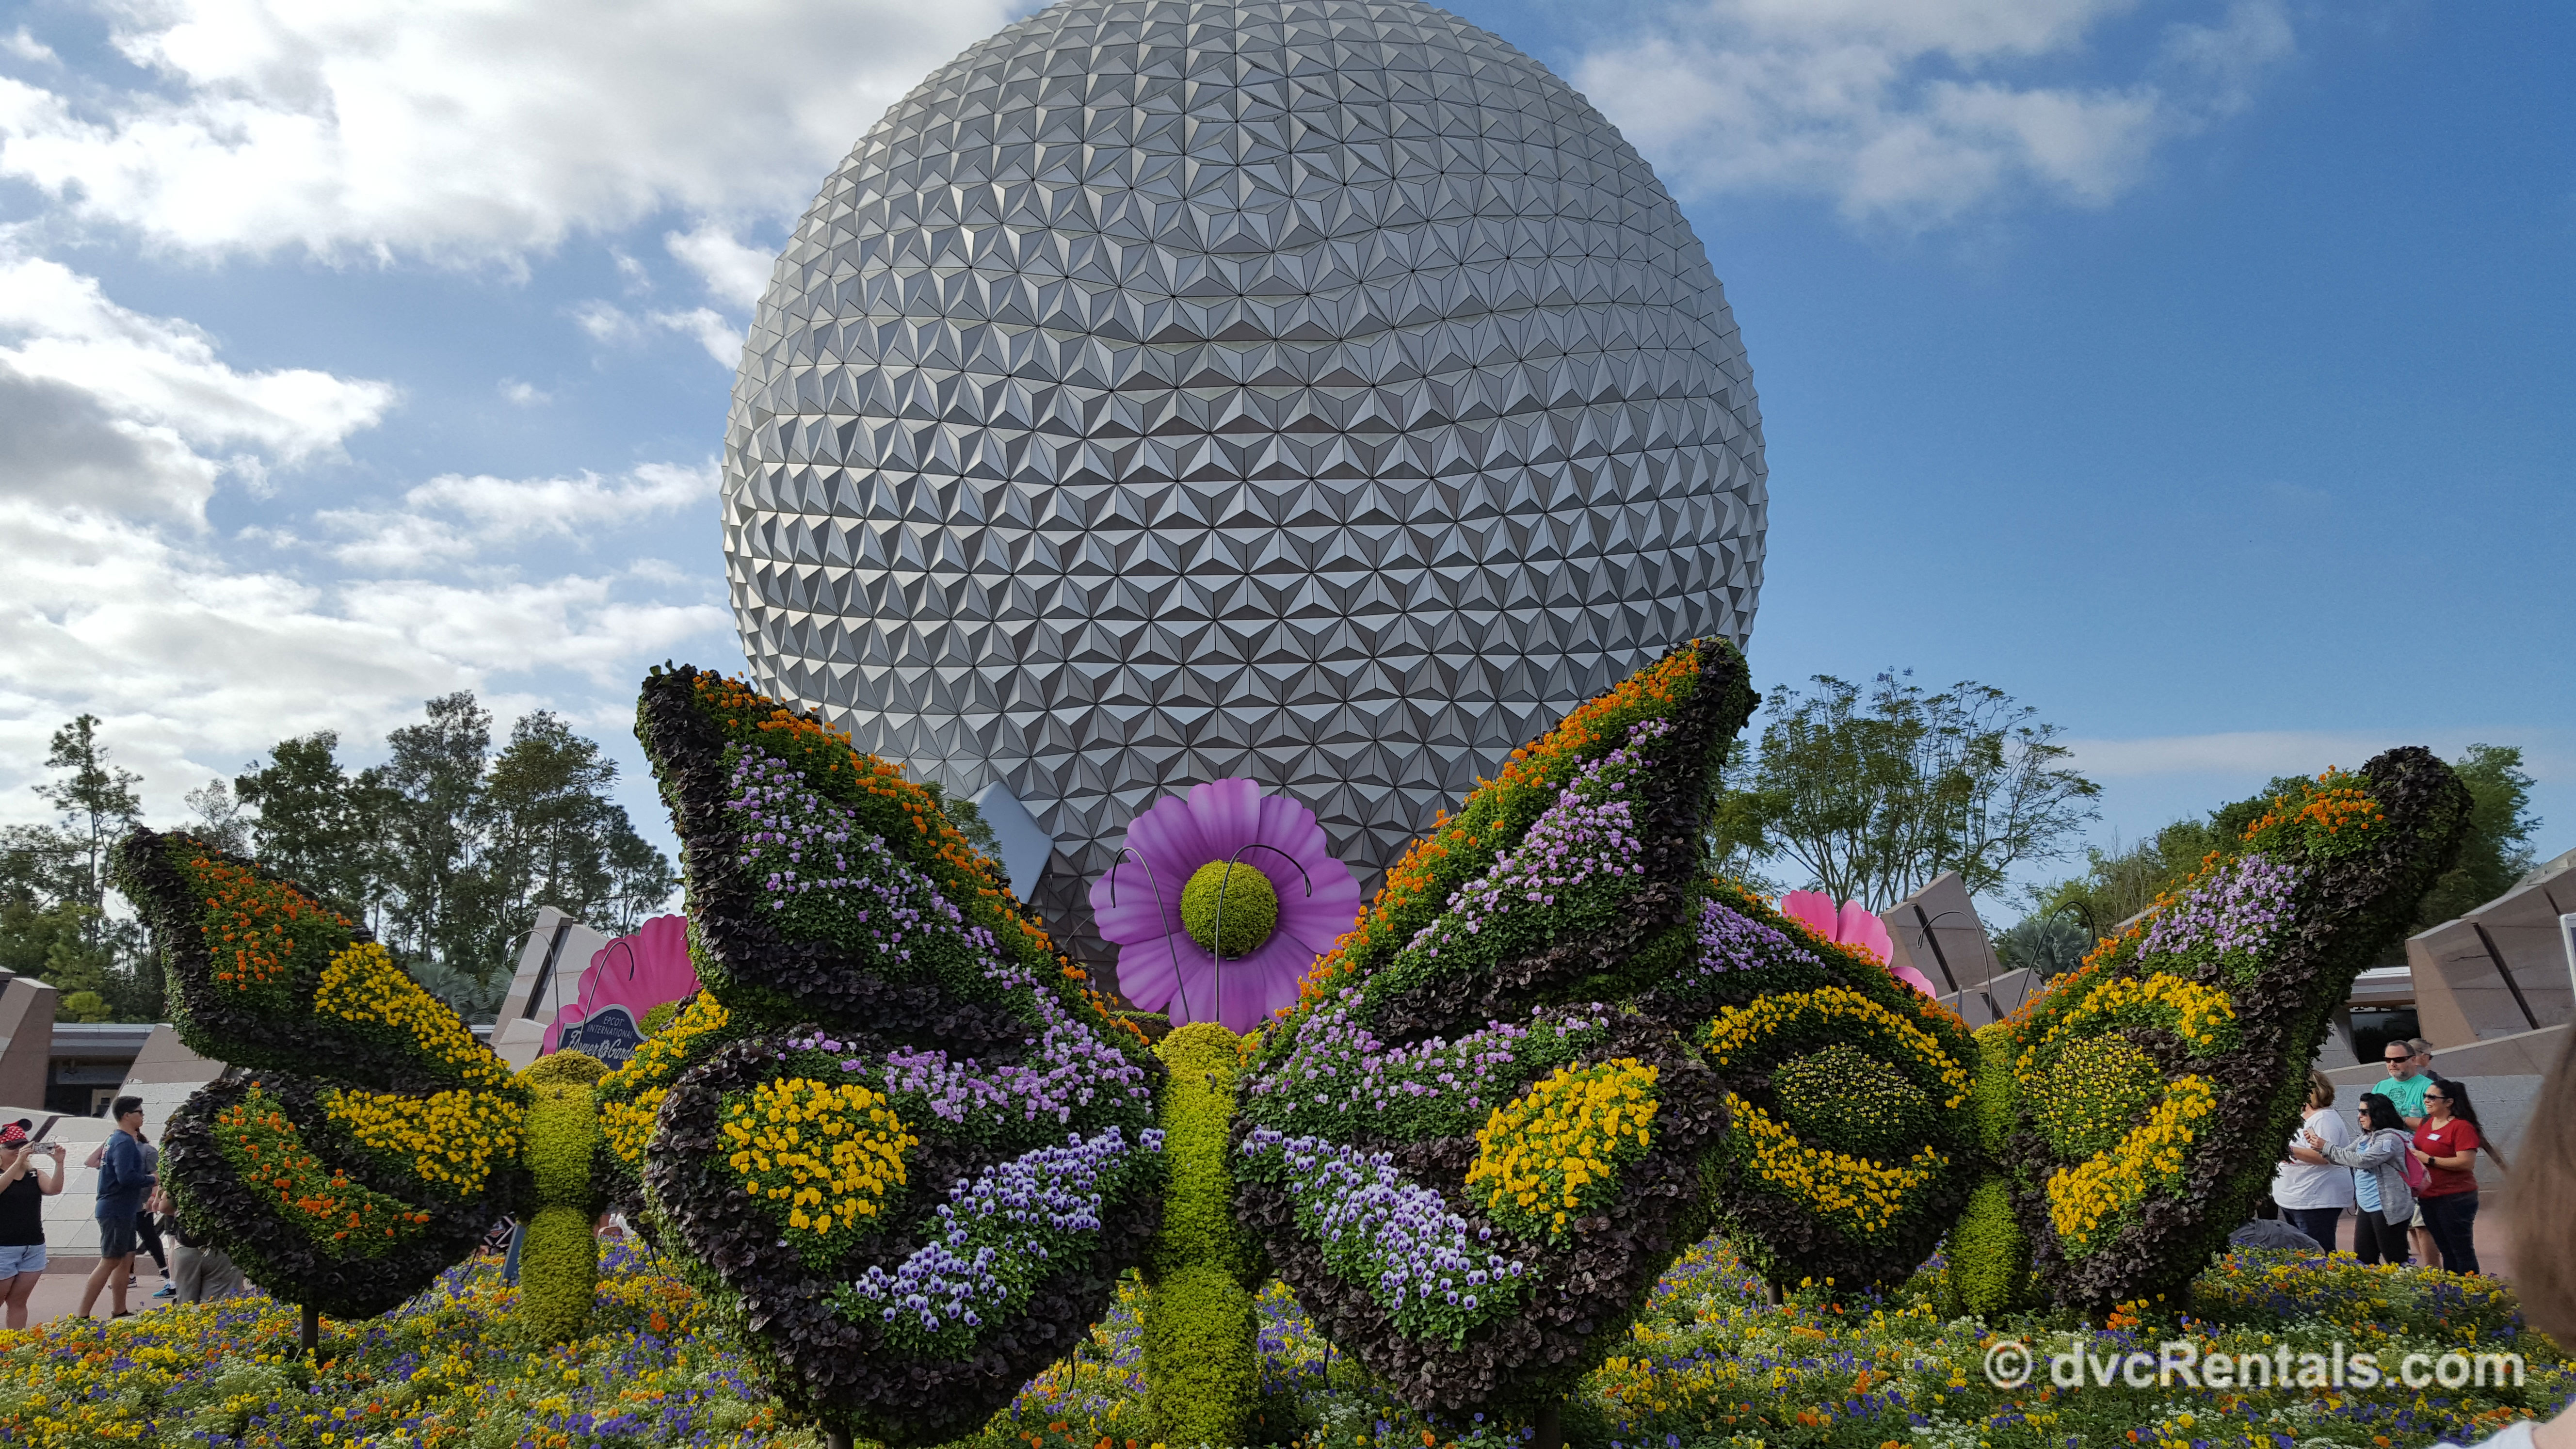 utterfly topiaries at Epcot’s International Flower and Garden Festival 2019